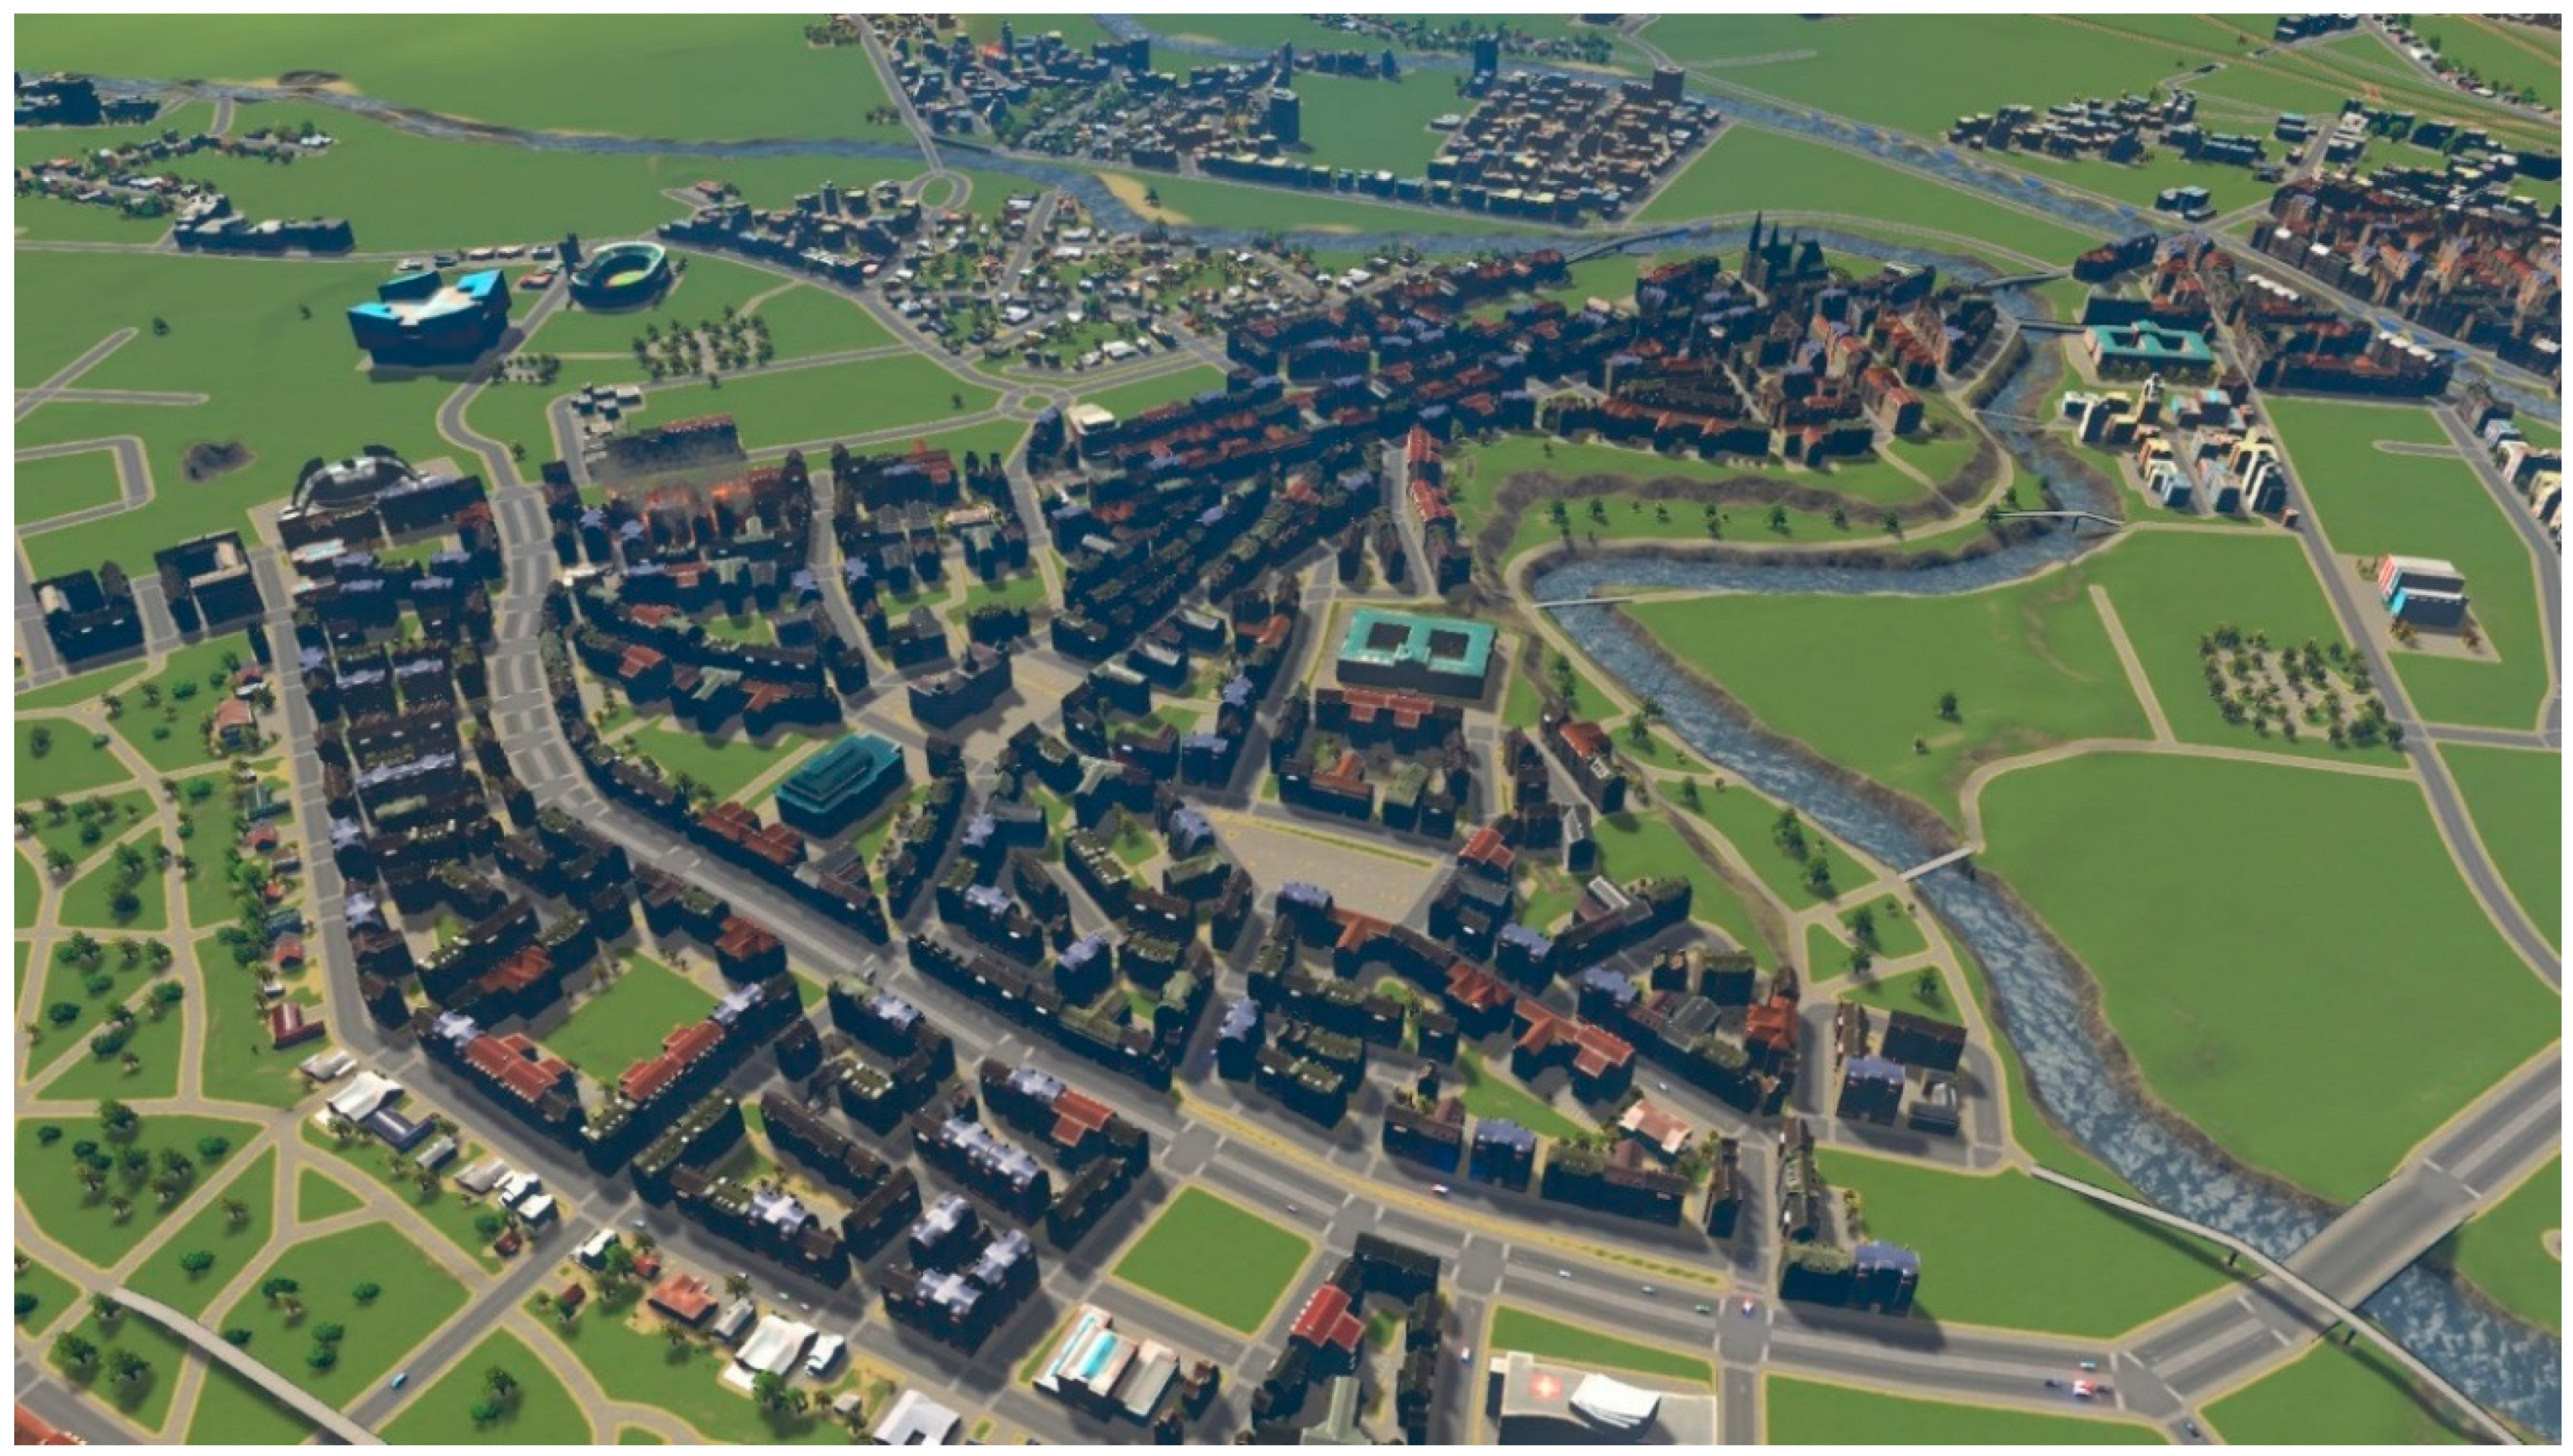 Ijgi Free Full Text Automatic Geodata Processing Methods For Real World City Visualizations In Cities Skylines Html